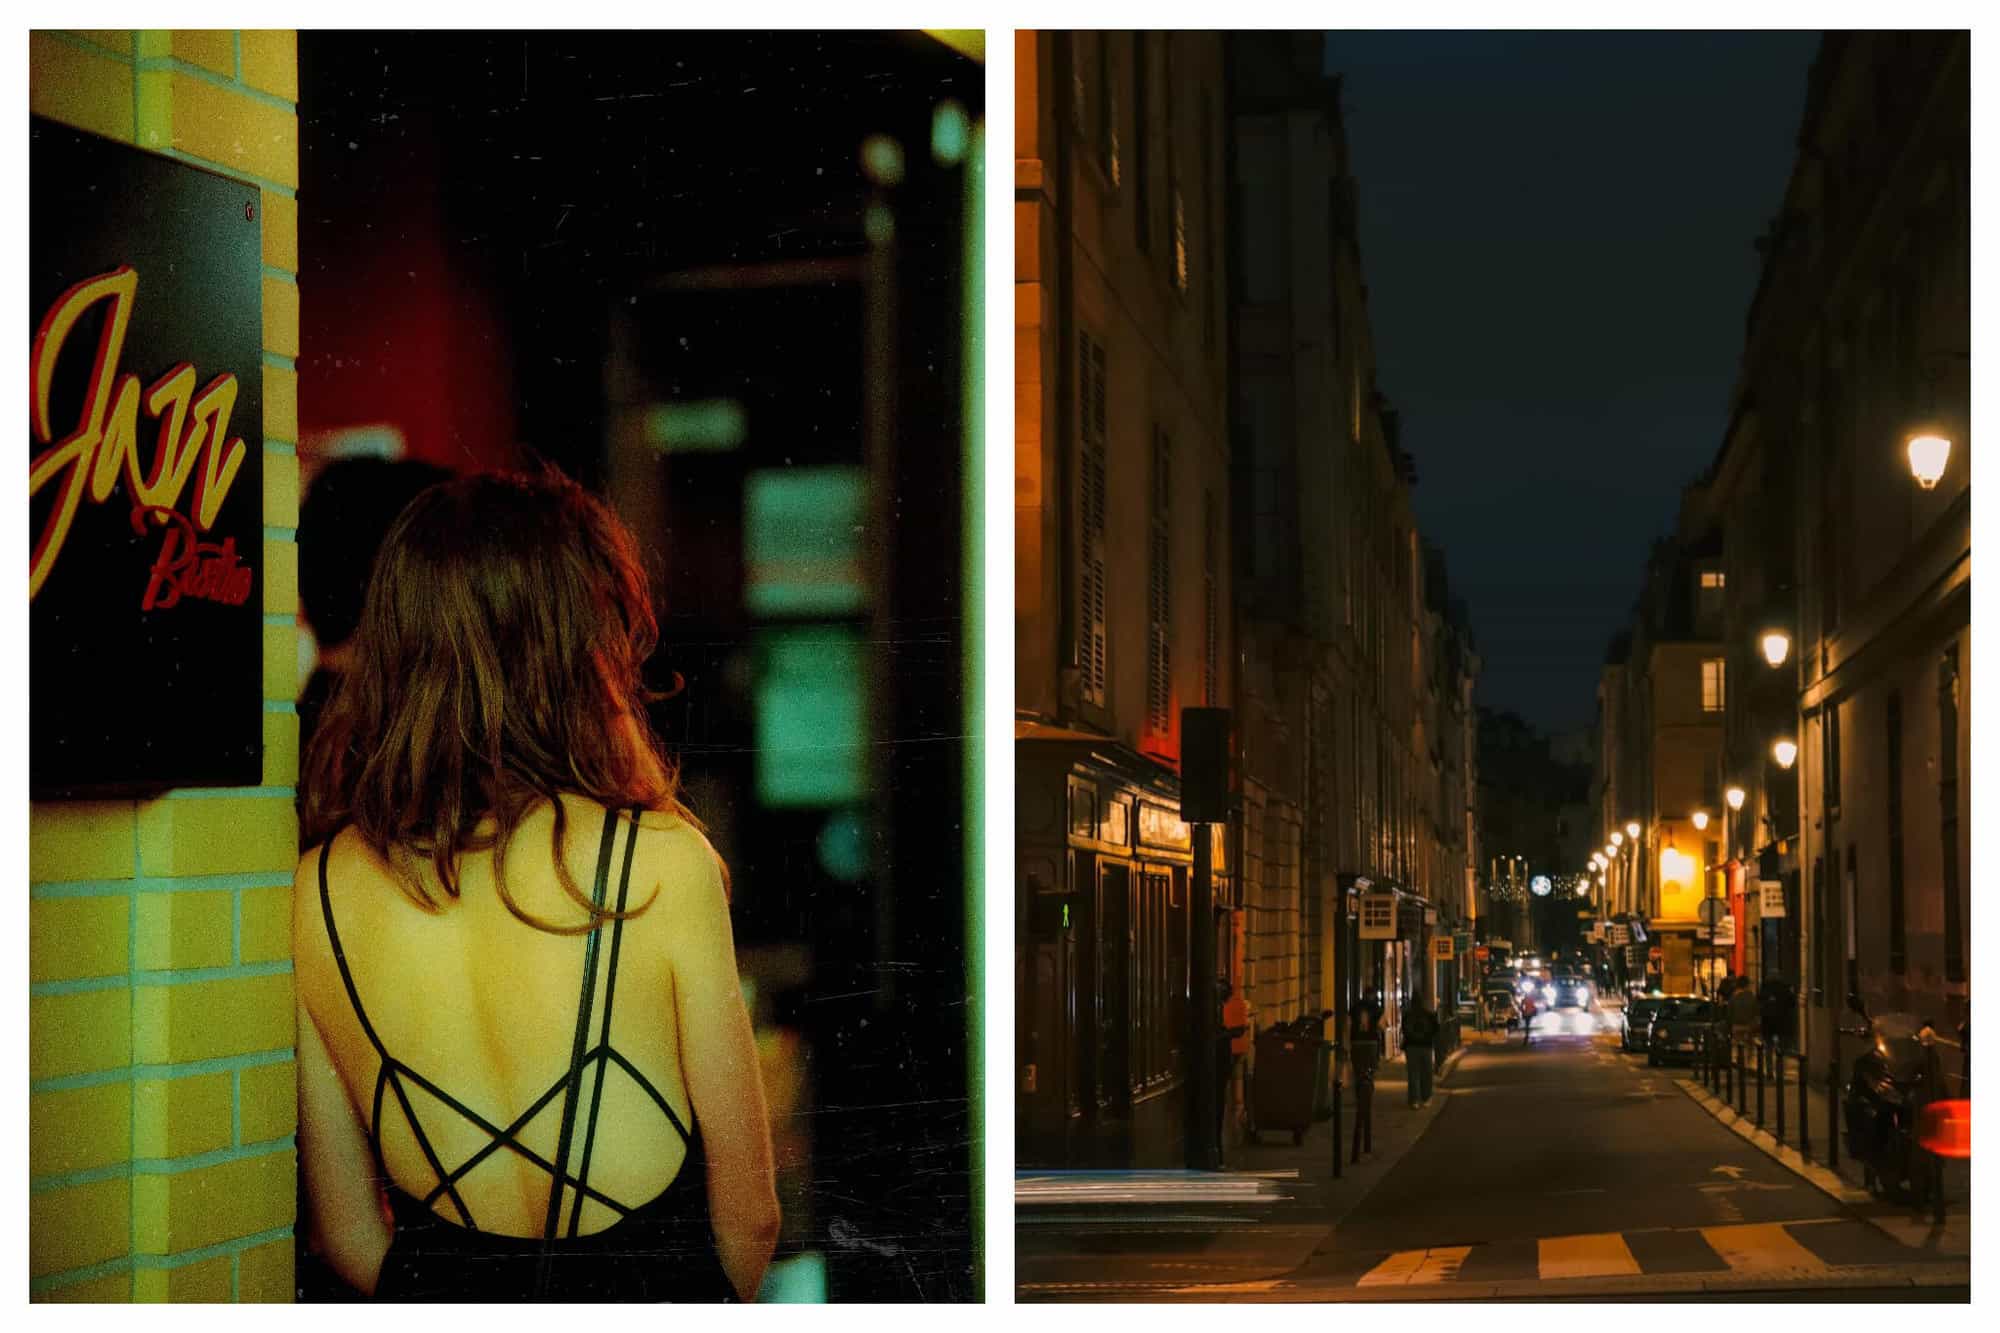 (Left) A woman with a black dress leans against a yellow wall looking at a band play on stage. (Right) A street at night with cars and yellow light lampposts.